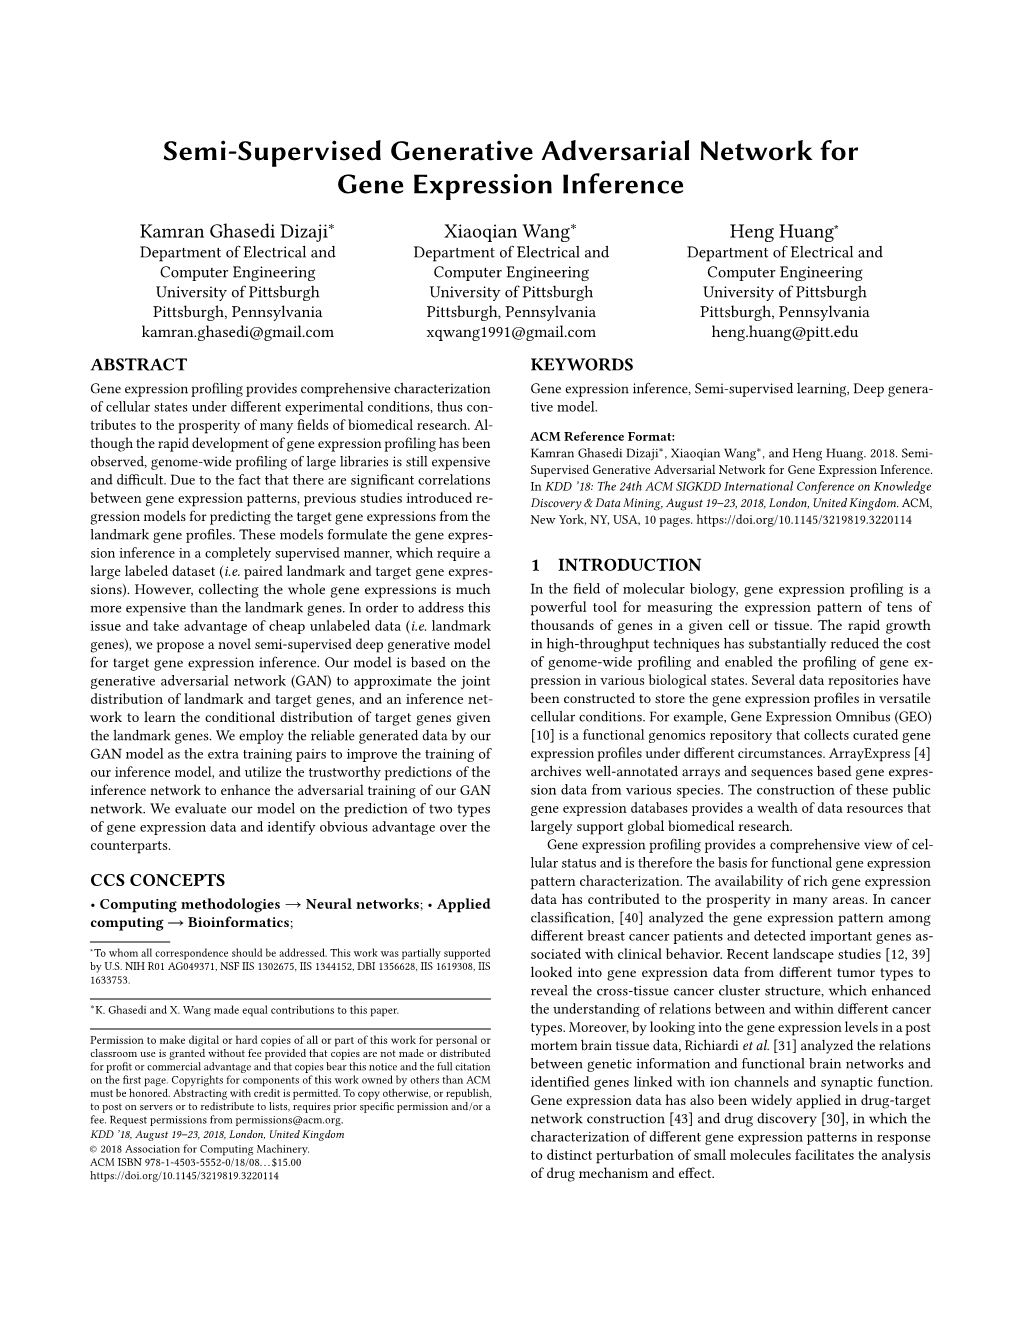 Semi-Supervised Generative Adversarial Network for Gene Expression Inference